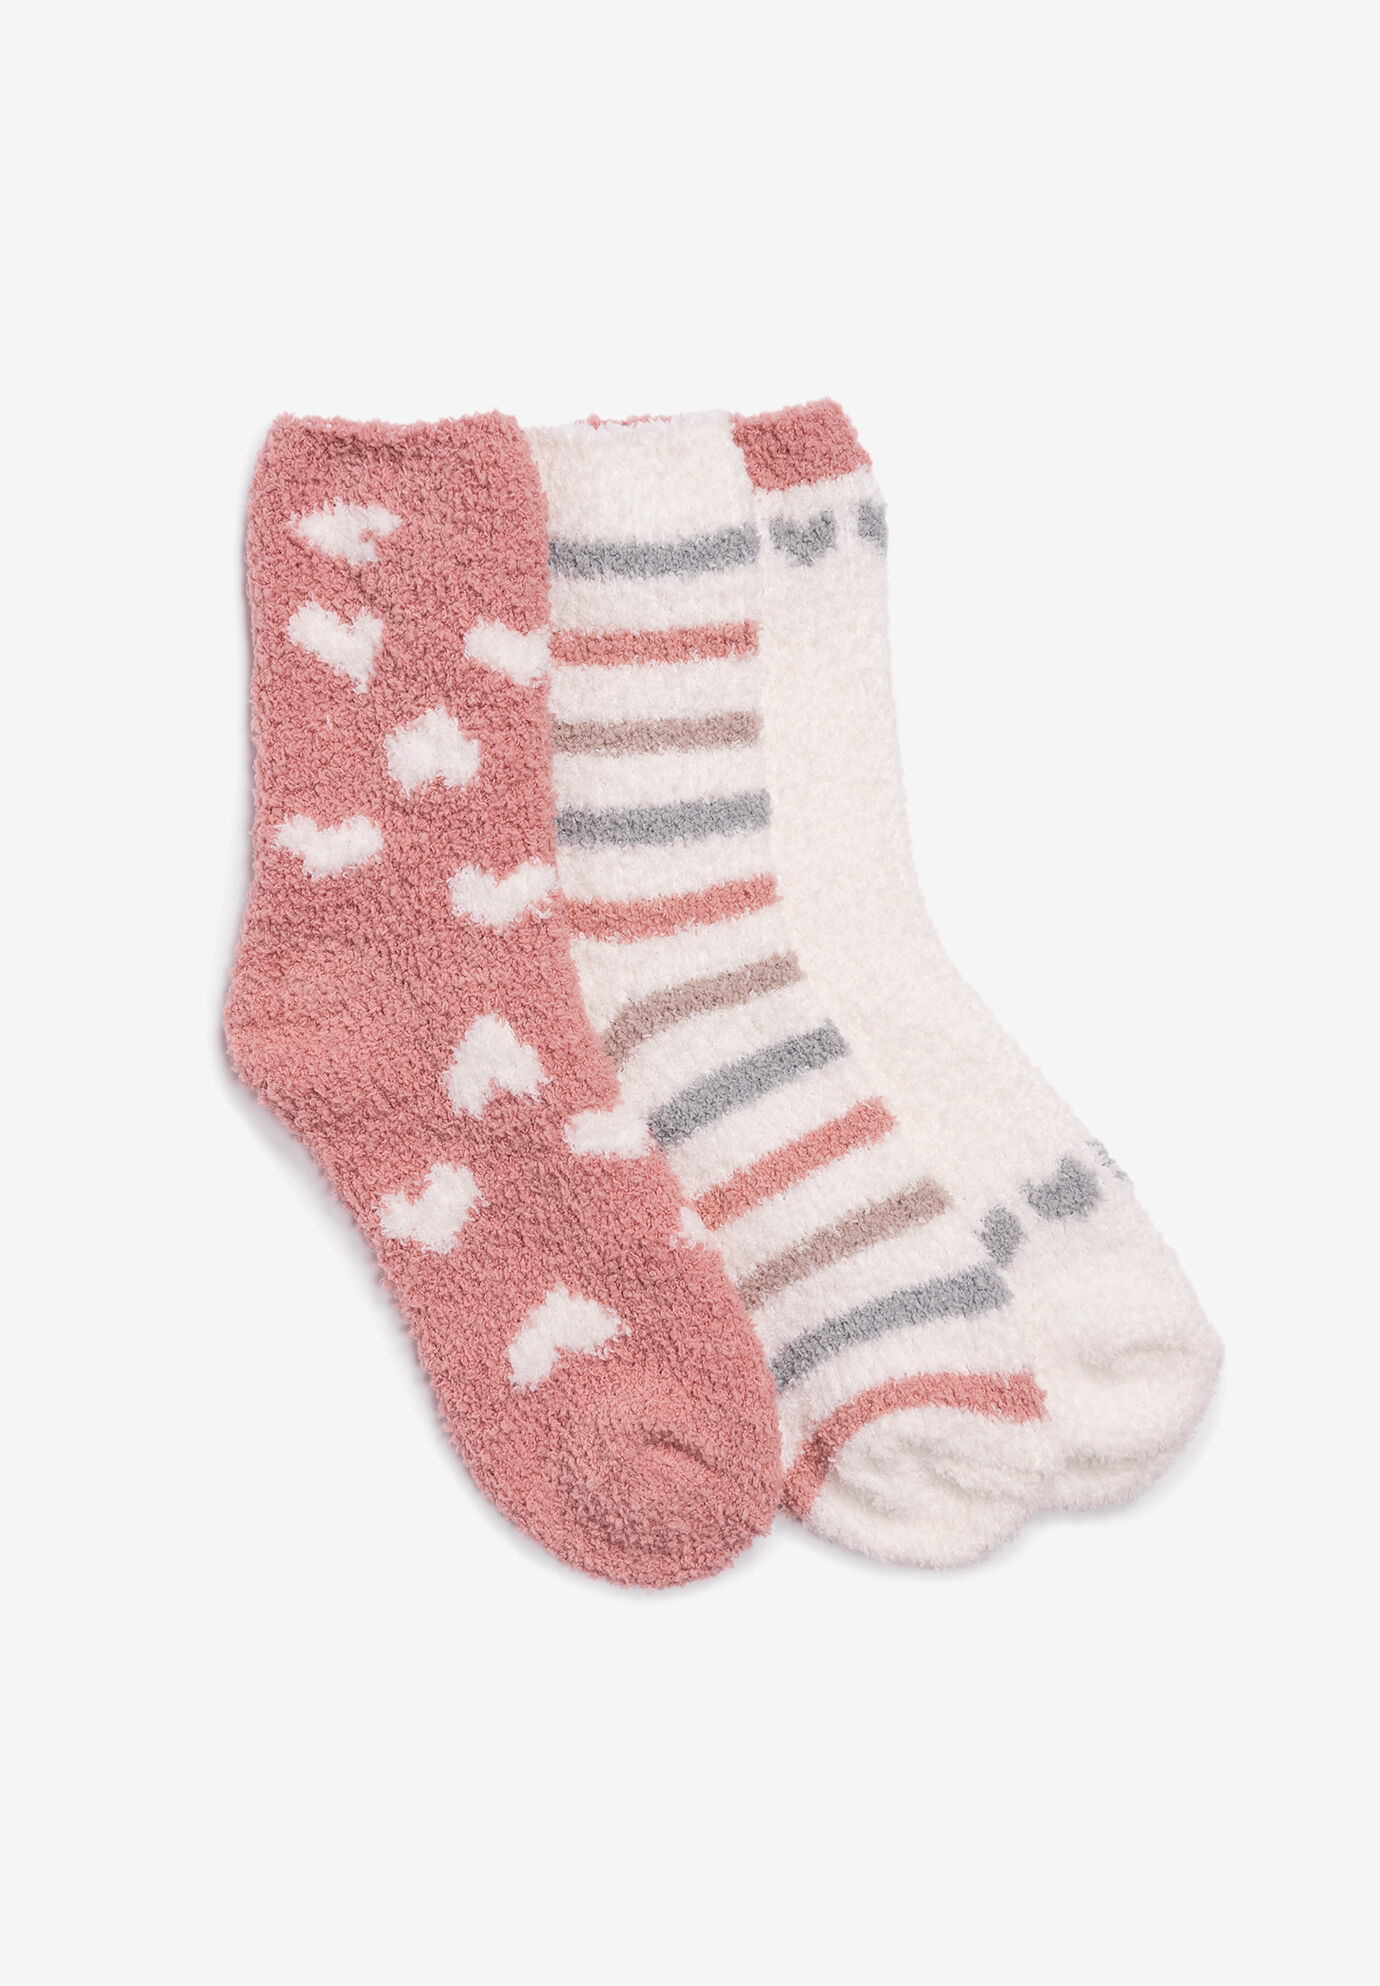 Women's 3 Pack Holiday Crew Socks by MUK LUKS in Peach (Size ONE)